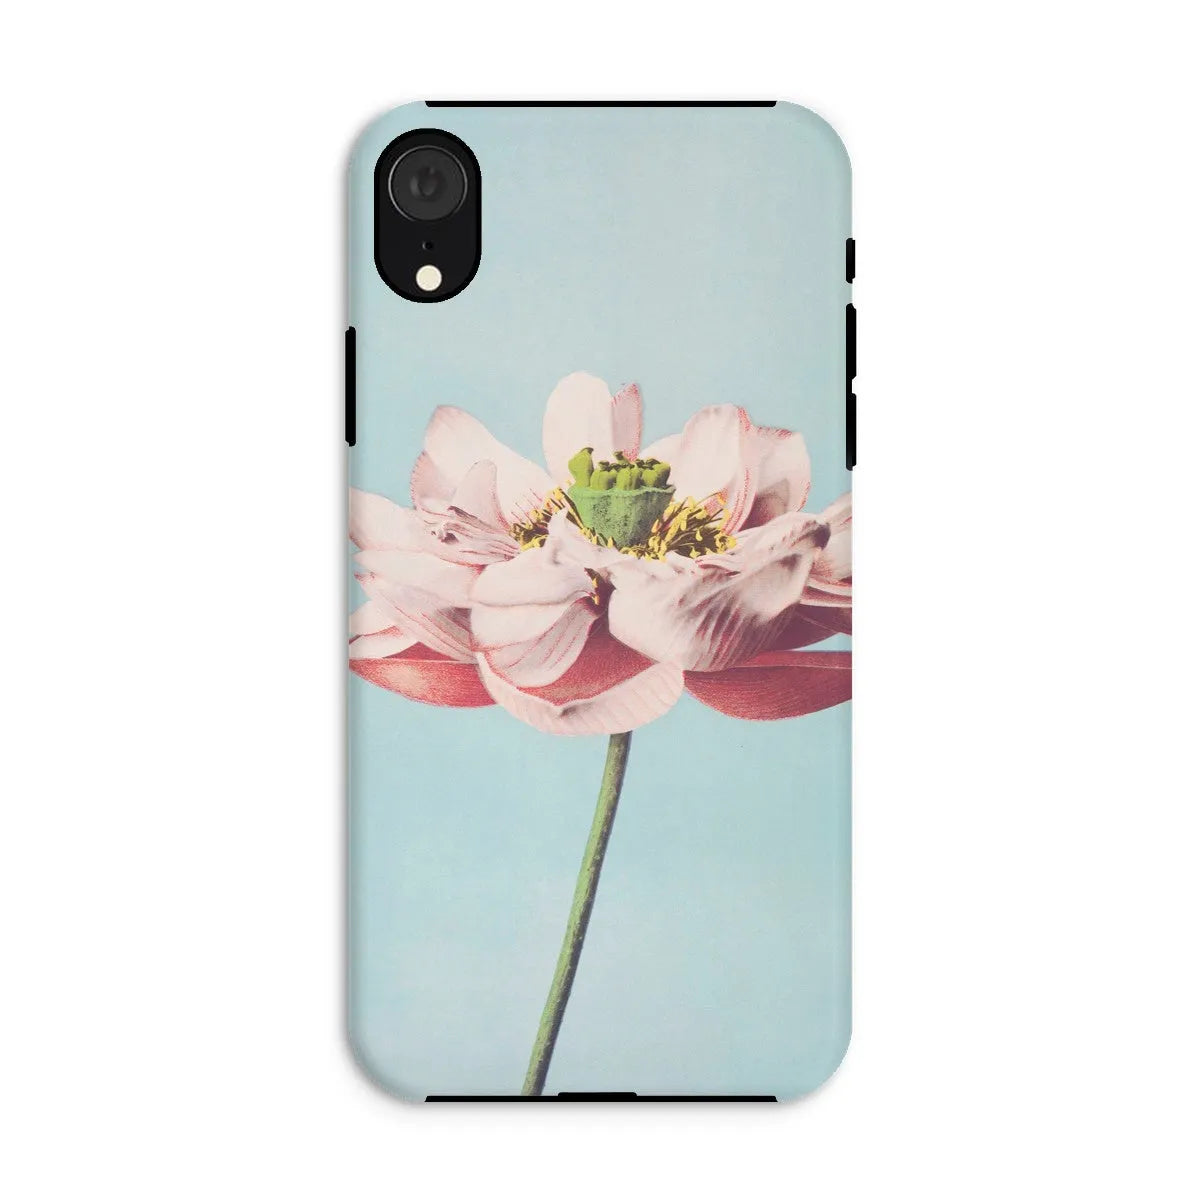 Pink Water Lily By Kazumasa Ogawa Art Phone Case - Iphone Xr / Matte - Mobile Phone Cases - Aesthetic Art